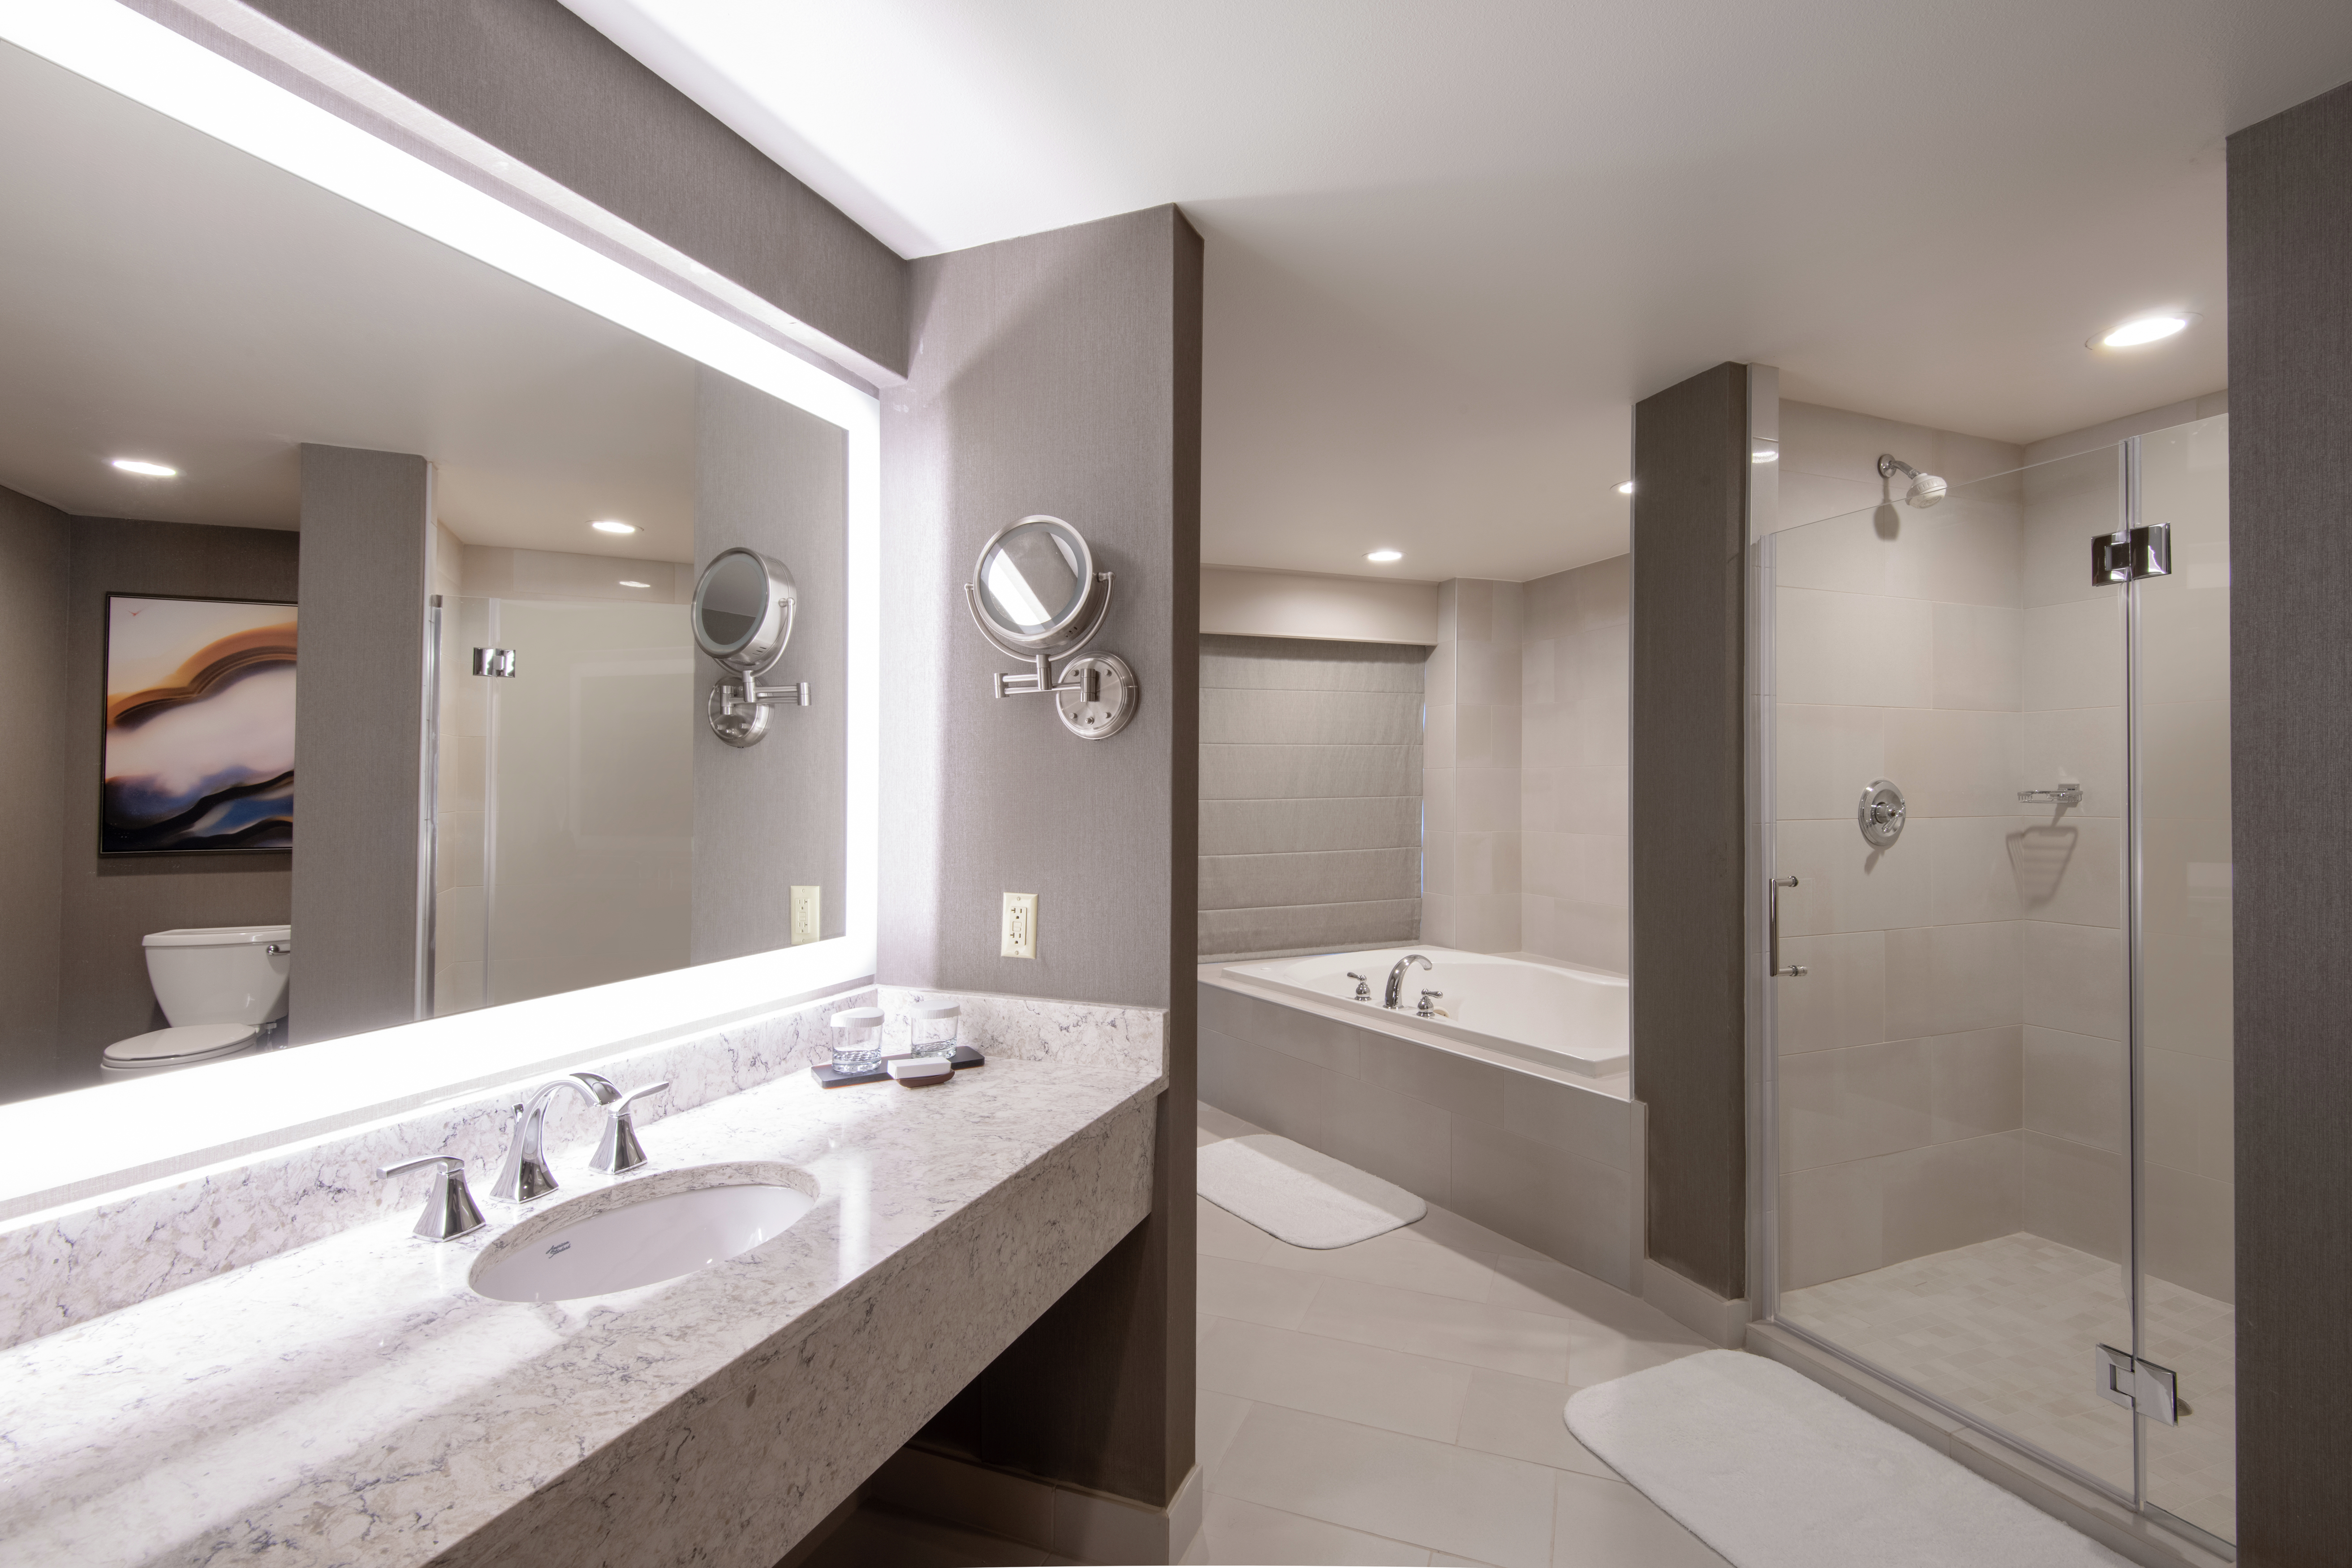 Presidential Suite Bathroom with Walk-In Shower and Separate Tub